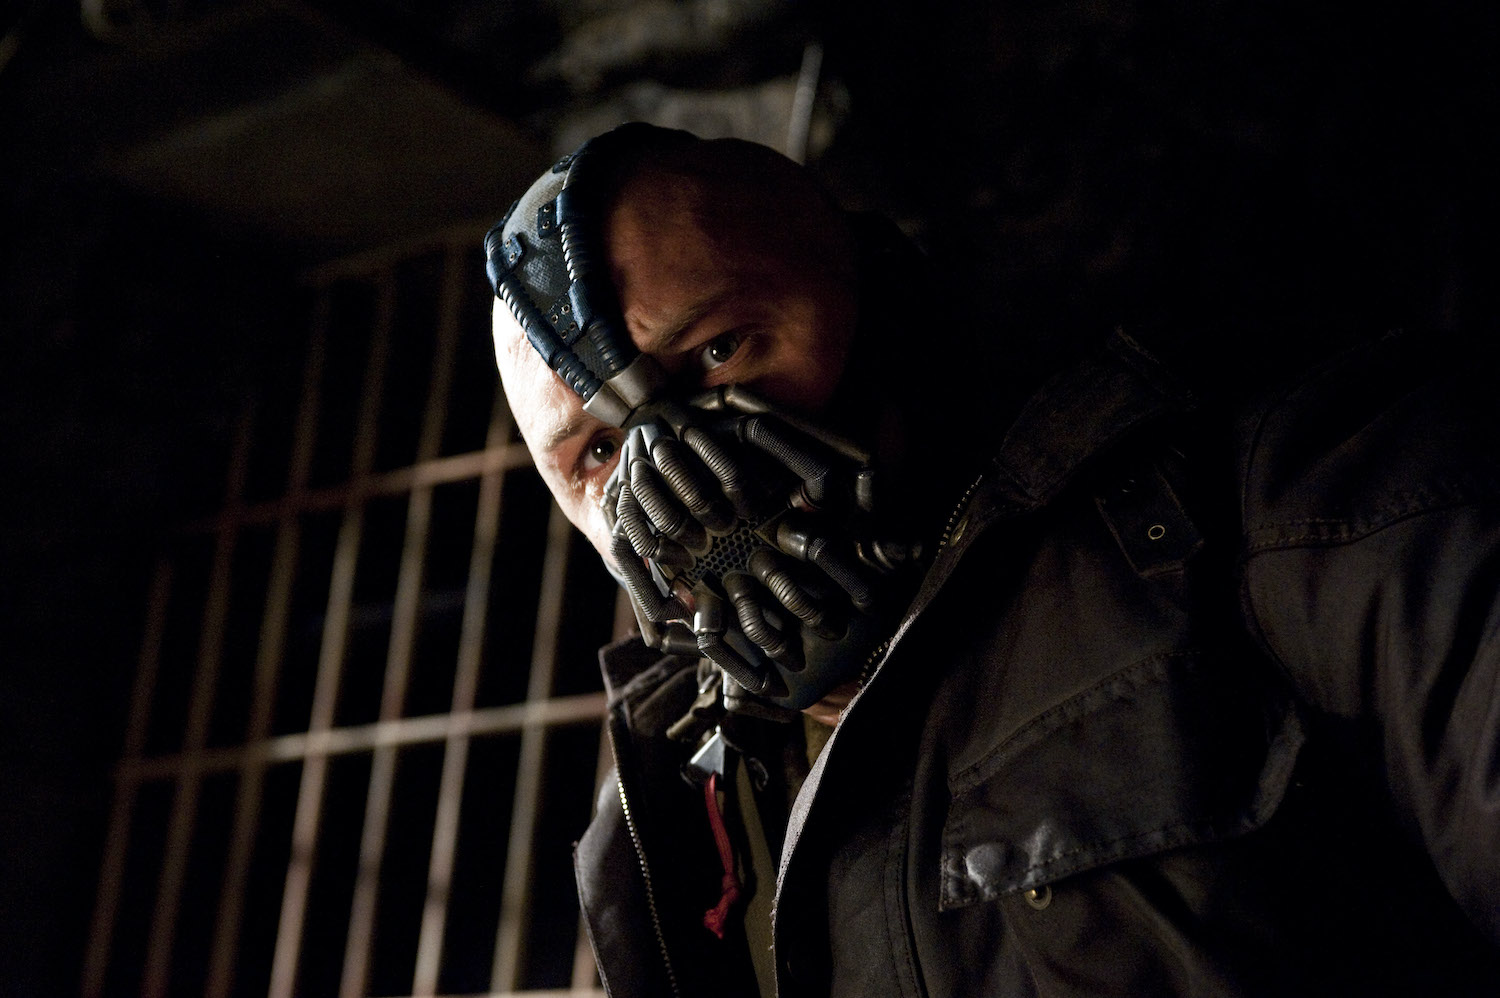 TOM HARDY as Bane in Warner Bros. Picturesí and Legendary Picturesí action thriller ìTHE DARK KNIGHT RISES,î a Warner Bros. Pictures release. TM and © DC Comics